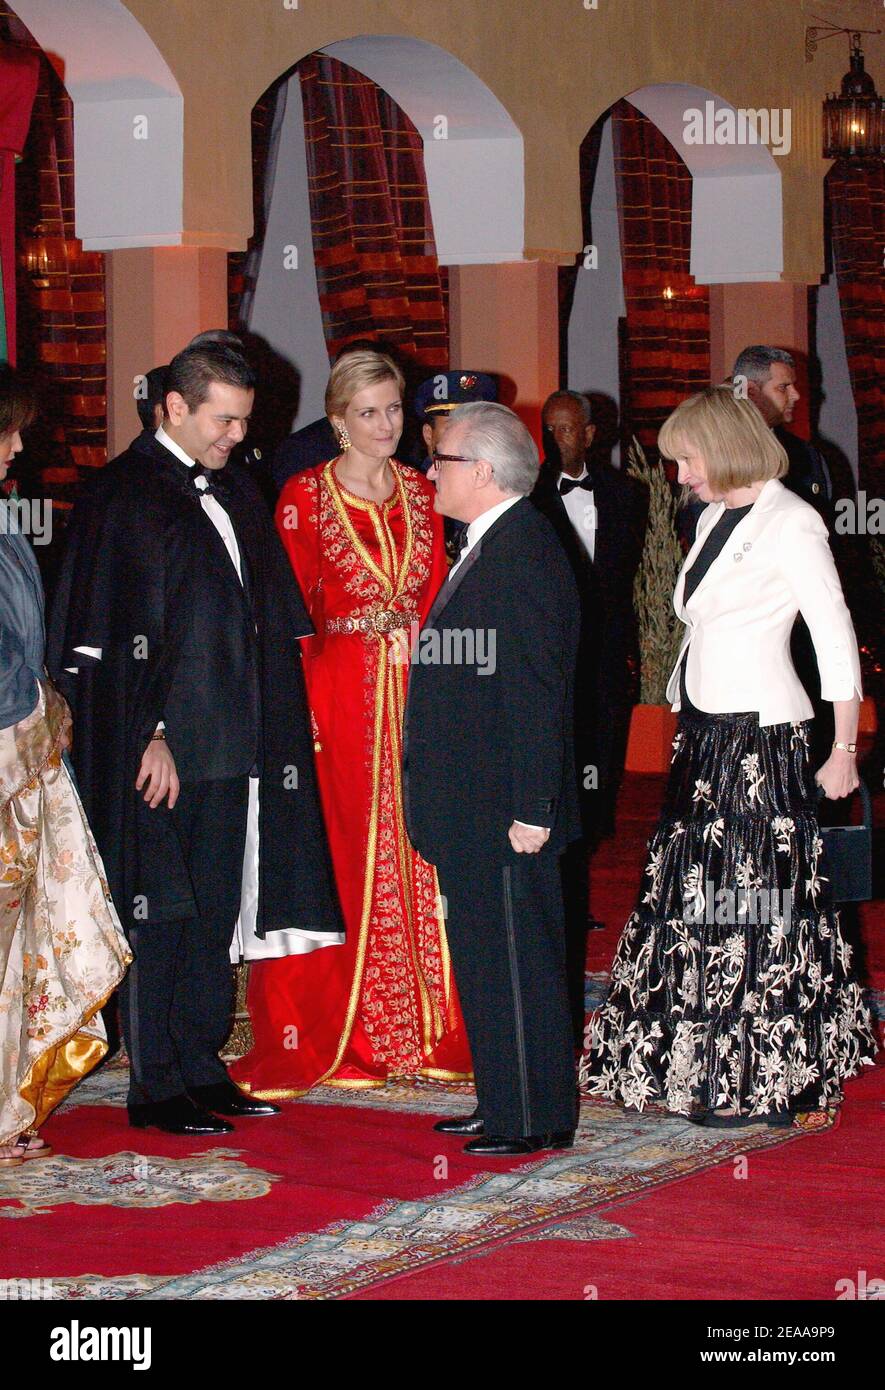 US director Martin Scorsese and wife attend a dinner presided by Prince Moulay Rachid during the 5th Marrakech International Film Festival in Marrakech, Morocco, on November 12, 2005. Photo by Bruno Klein/ABACAPRESS.COM Stock Photo